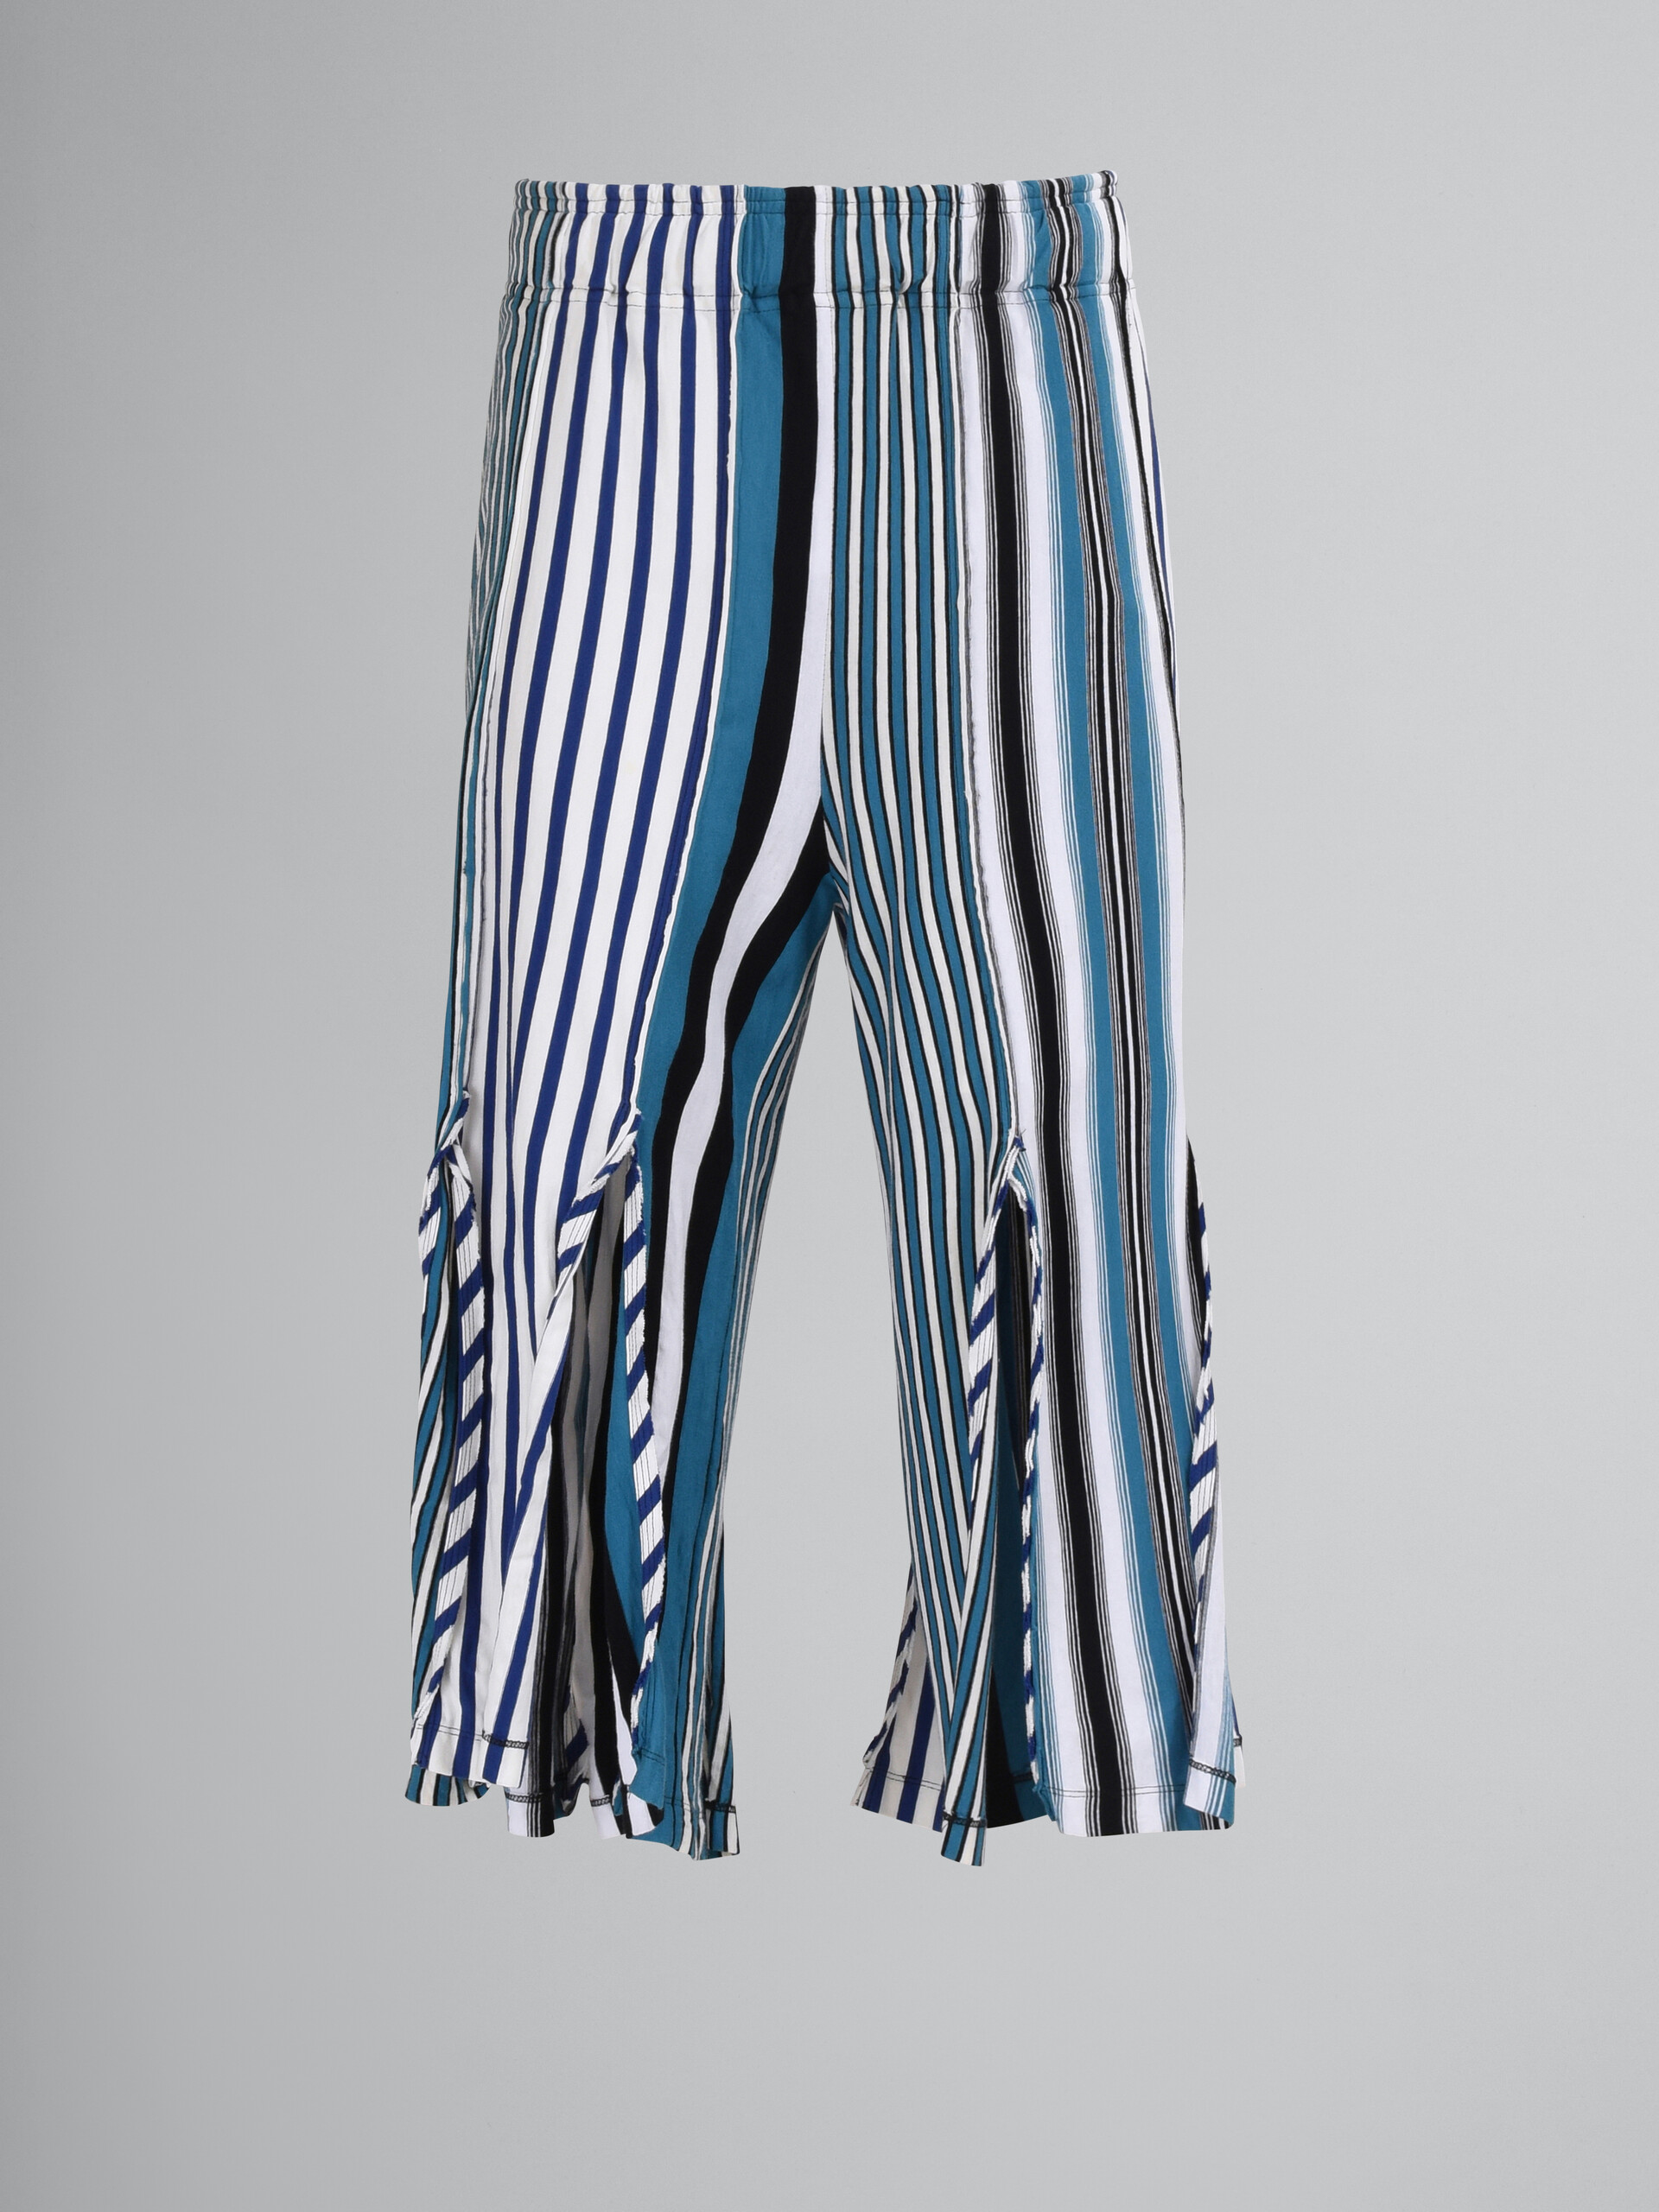 Compact striped jersey cropped pants - Pants - Image 1